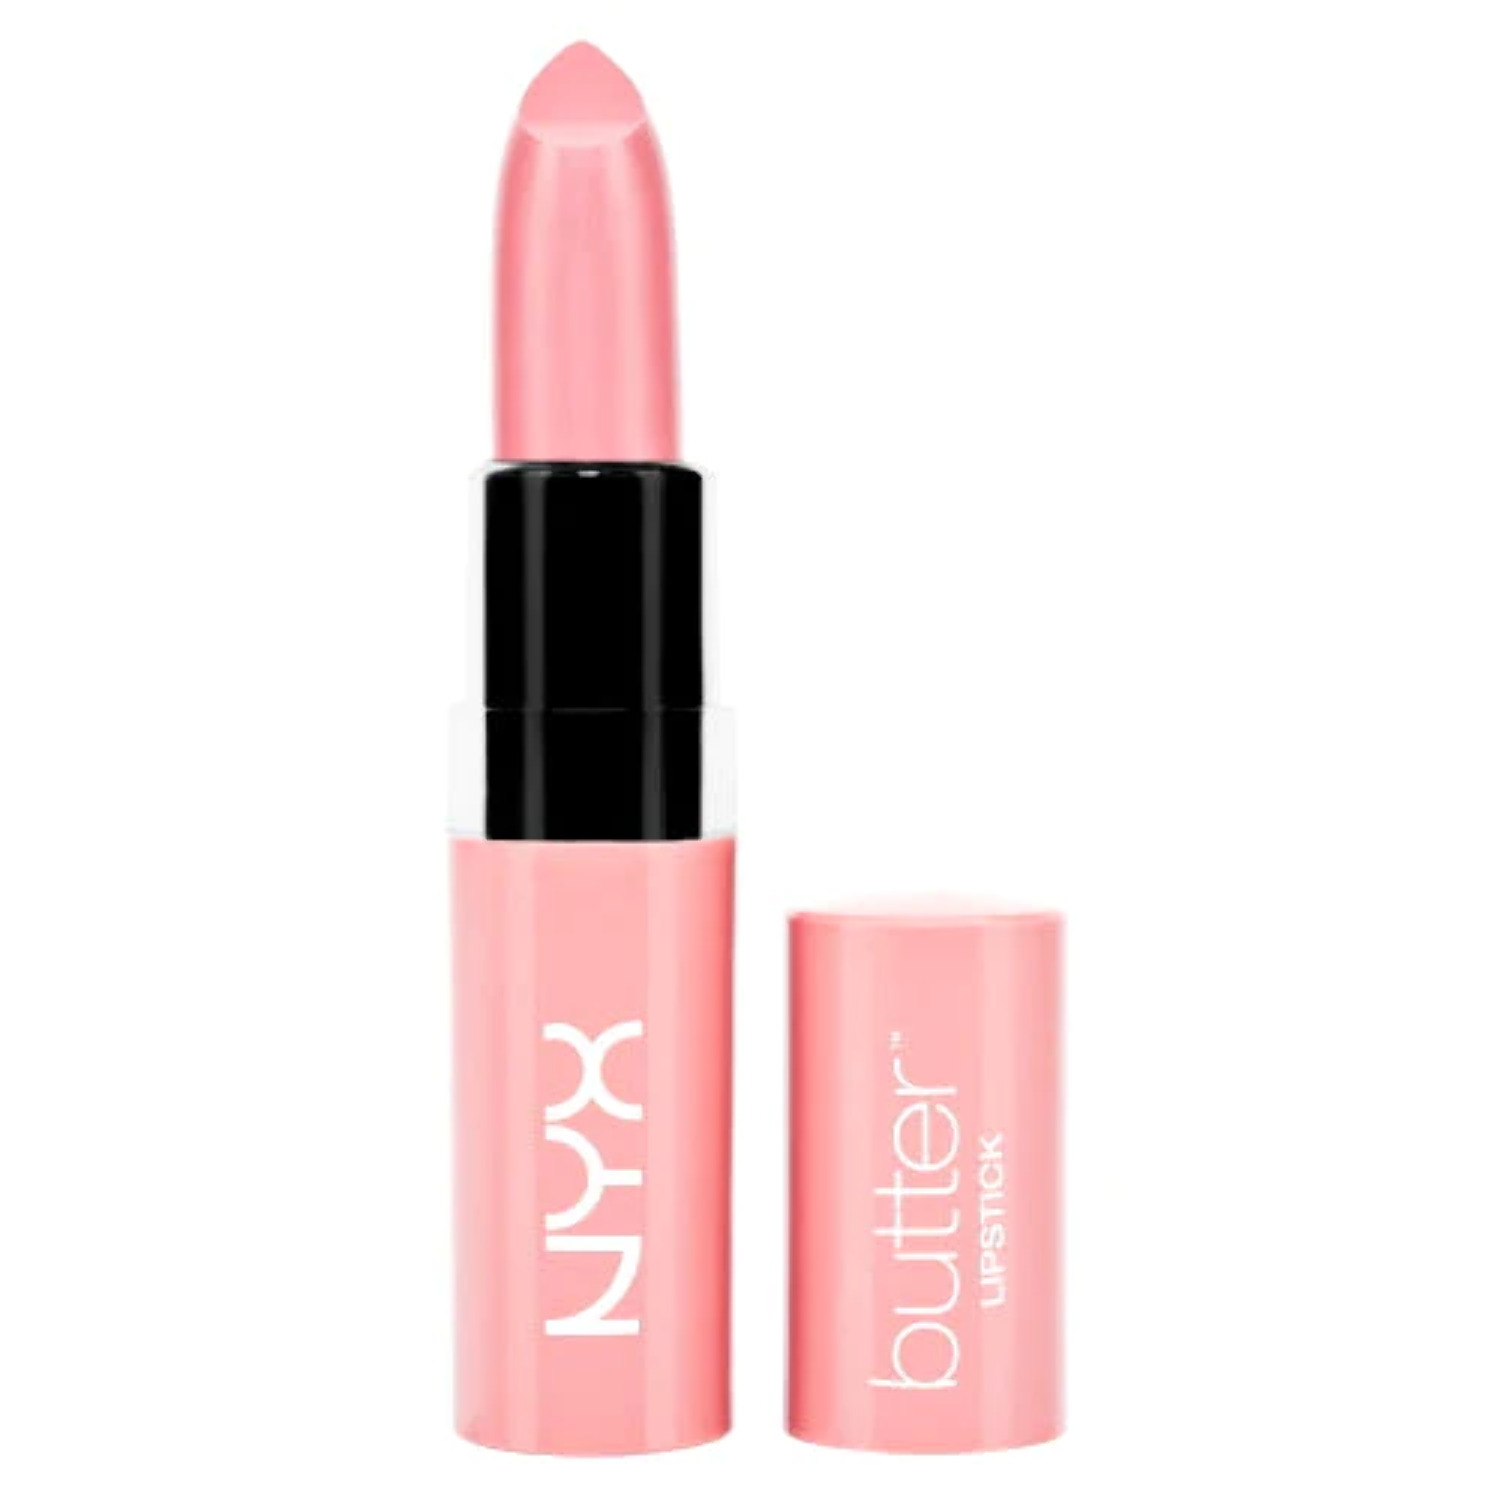 NYX Professional Makeup Butter Lipstick, Fire Brick - image 2 of 2